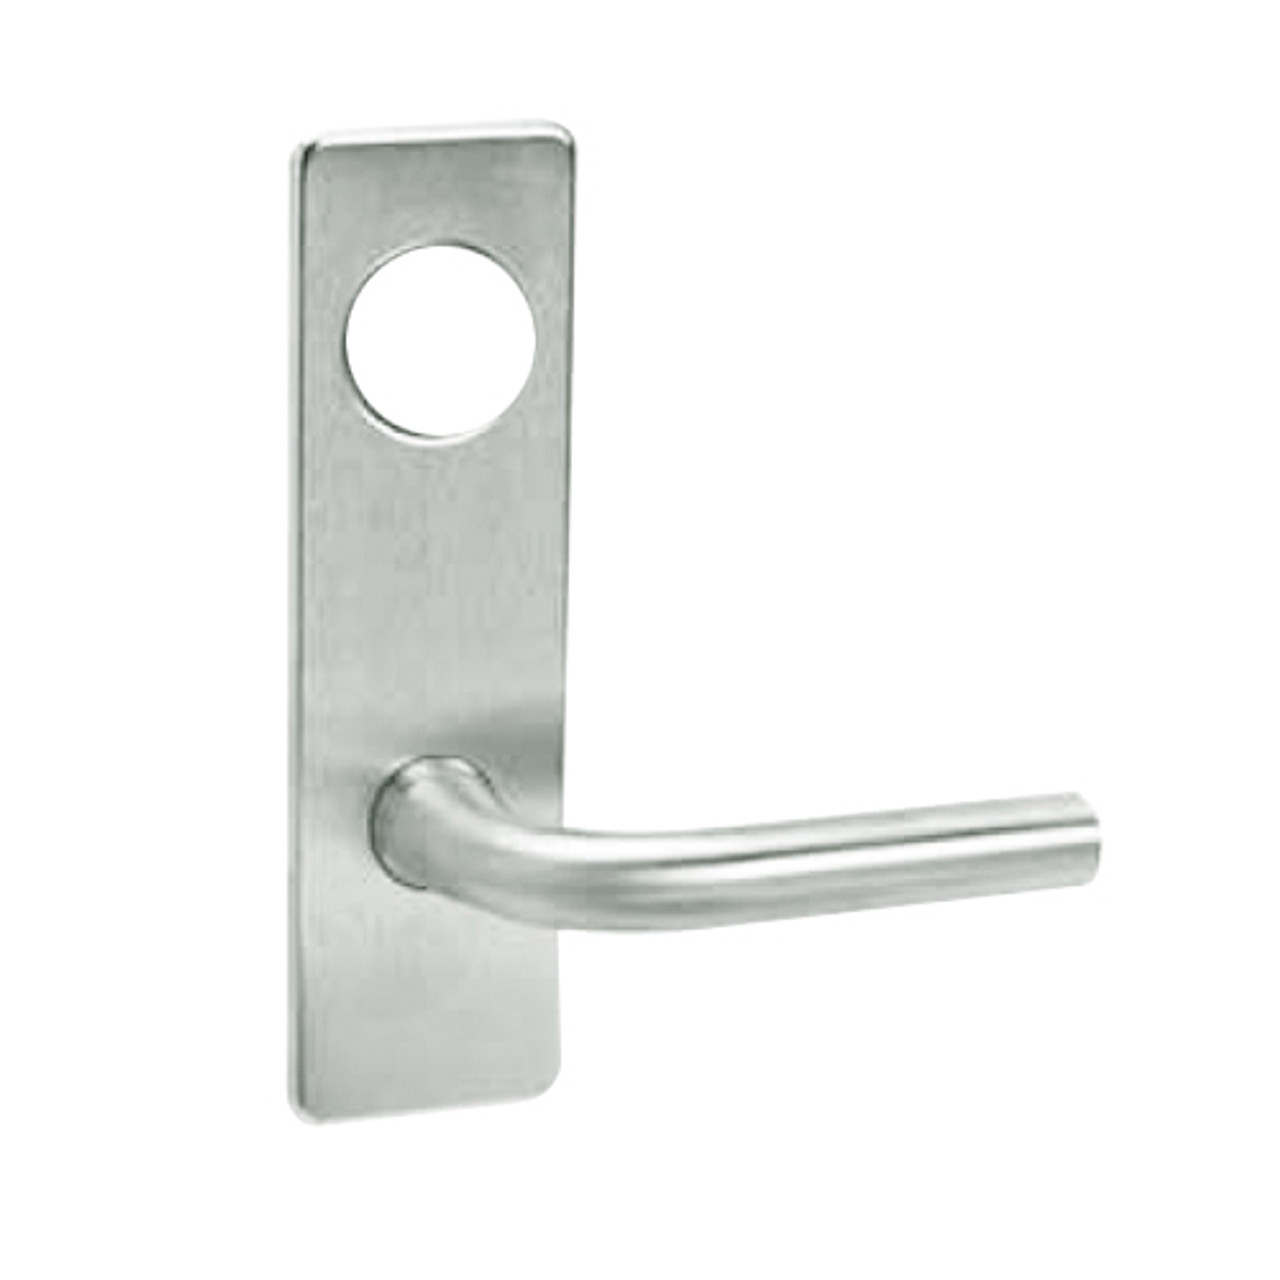 ML2054-RSR-618-M31 Corbin Russwin ML2000 Series Mortise Entrance Trim Pack with Regis Lever in Bright Nickel